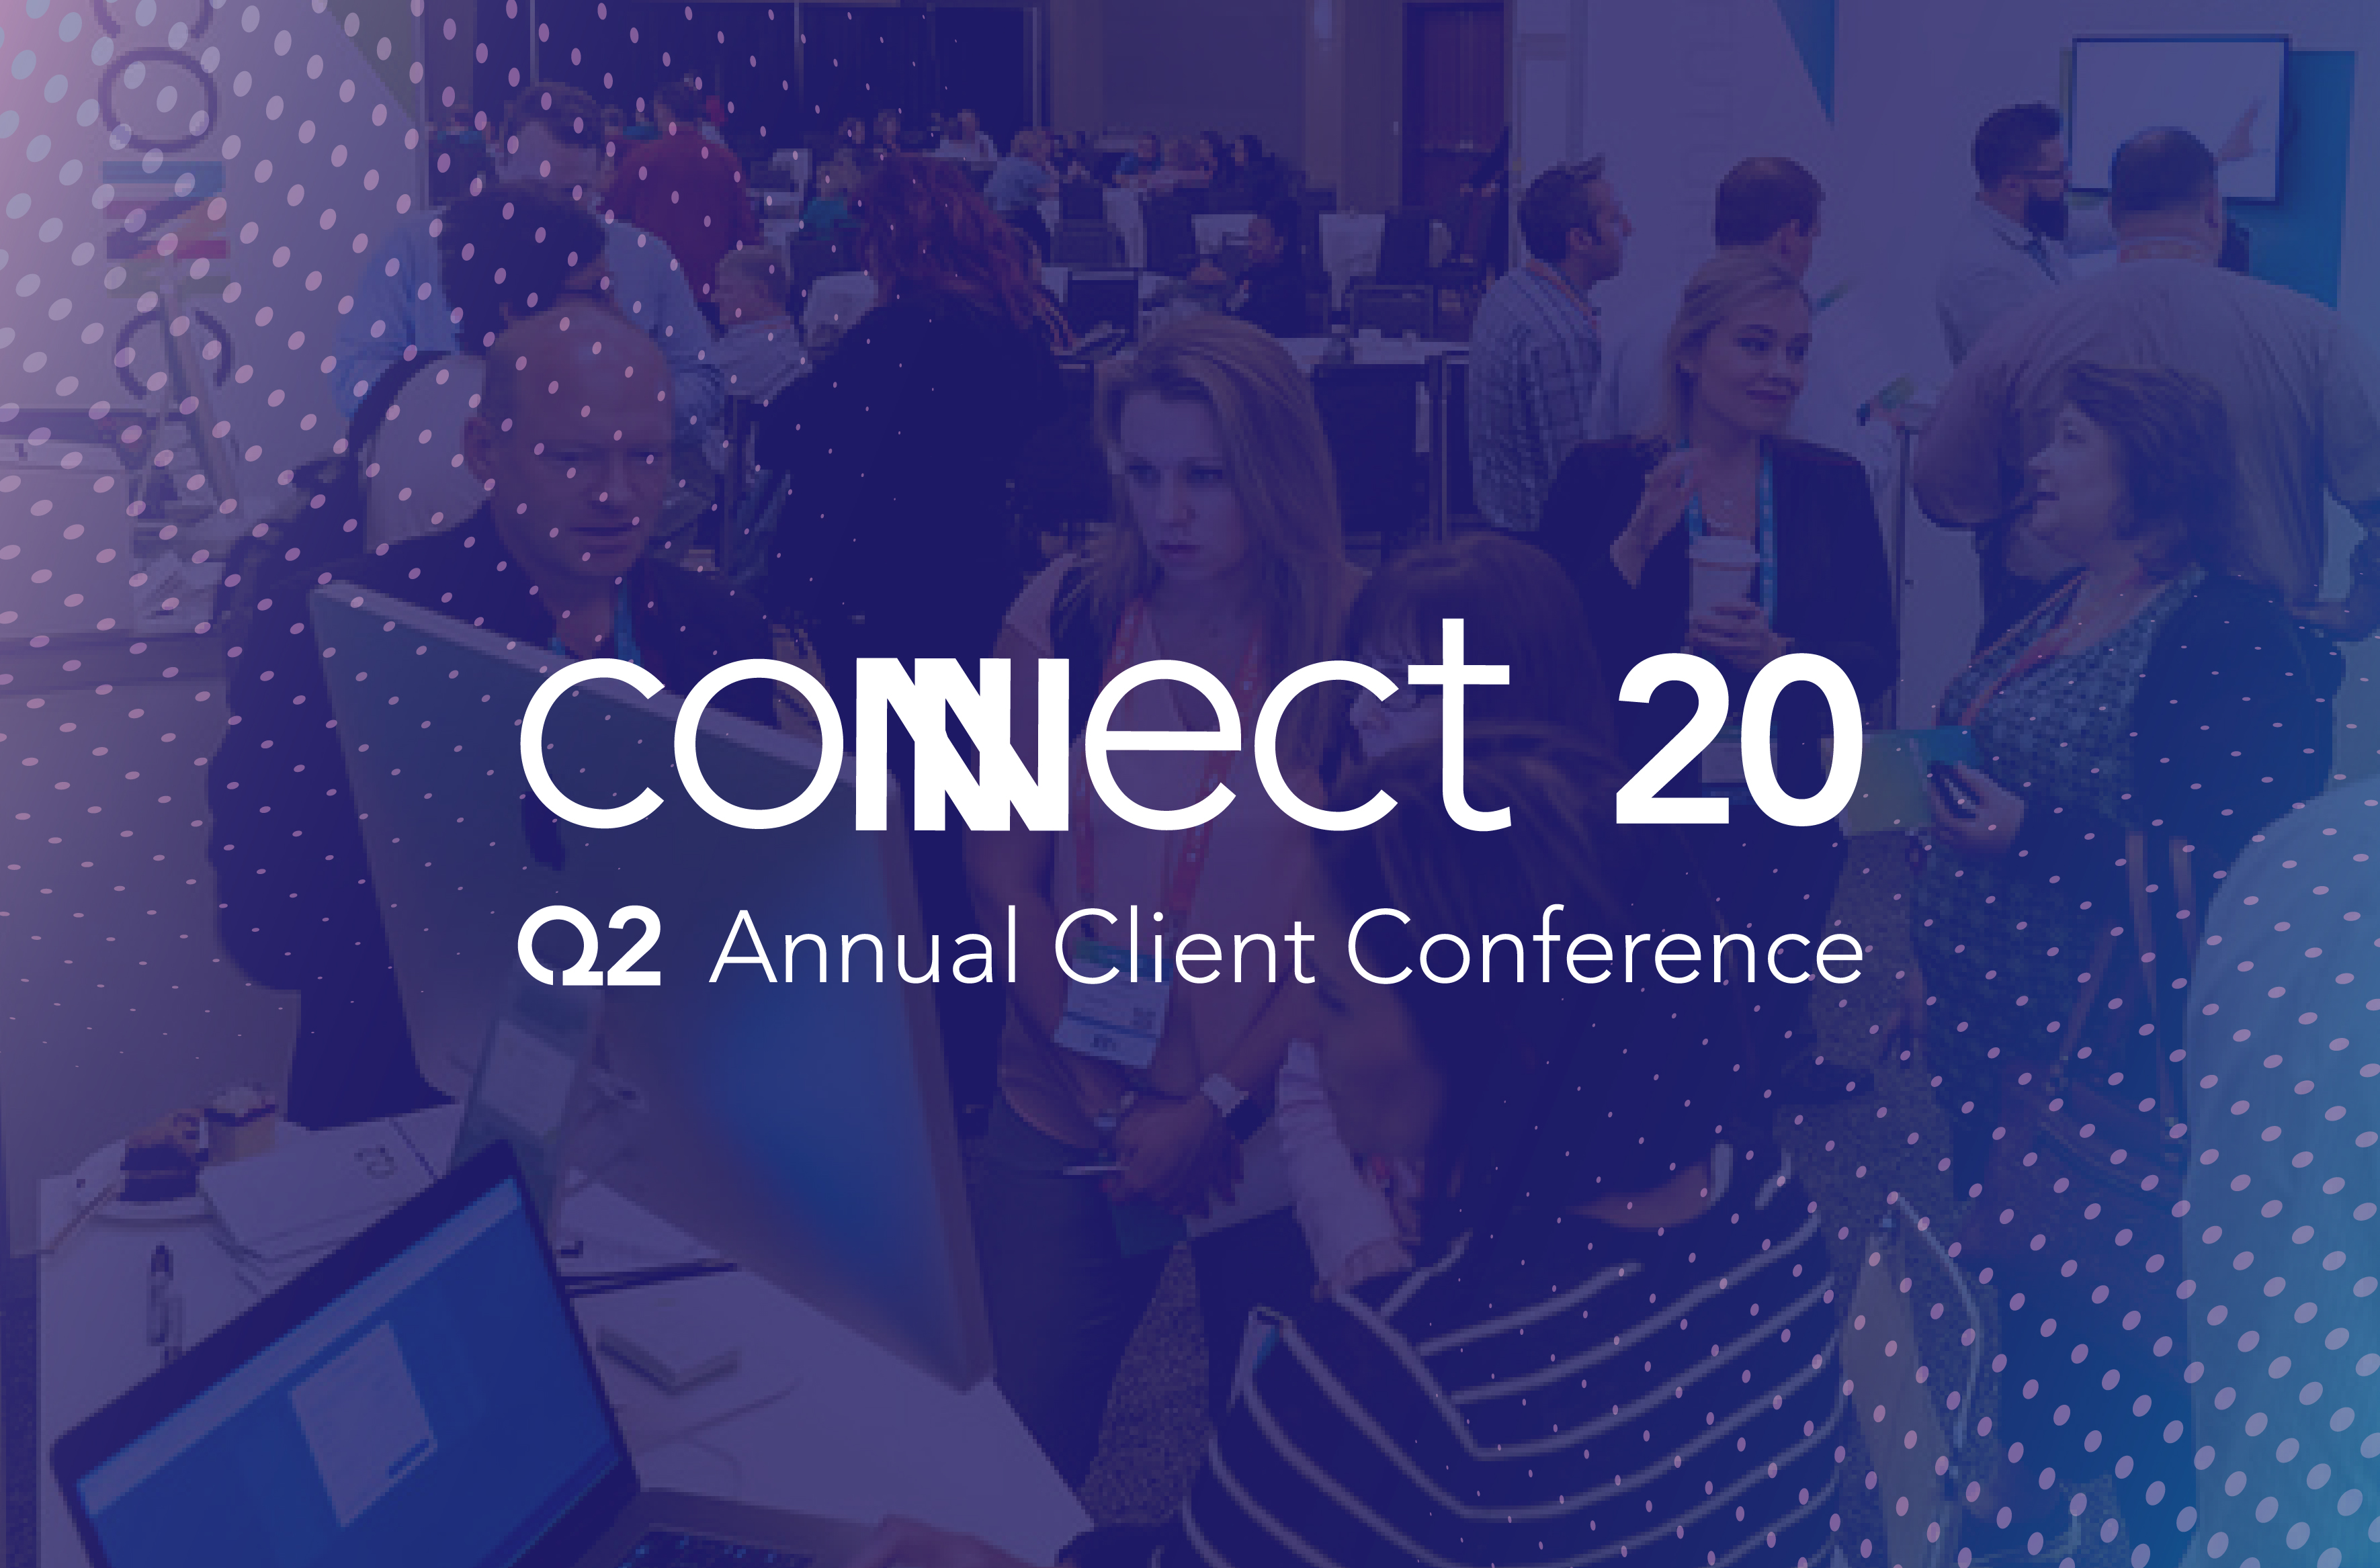 Virtual CONNECT 20 Event Four: Expanded Learning Opportunities to Address Industry Needs Now